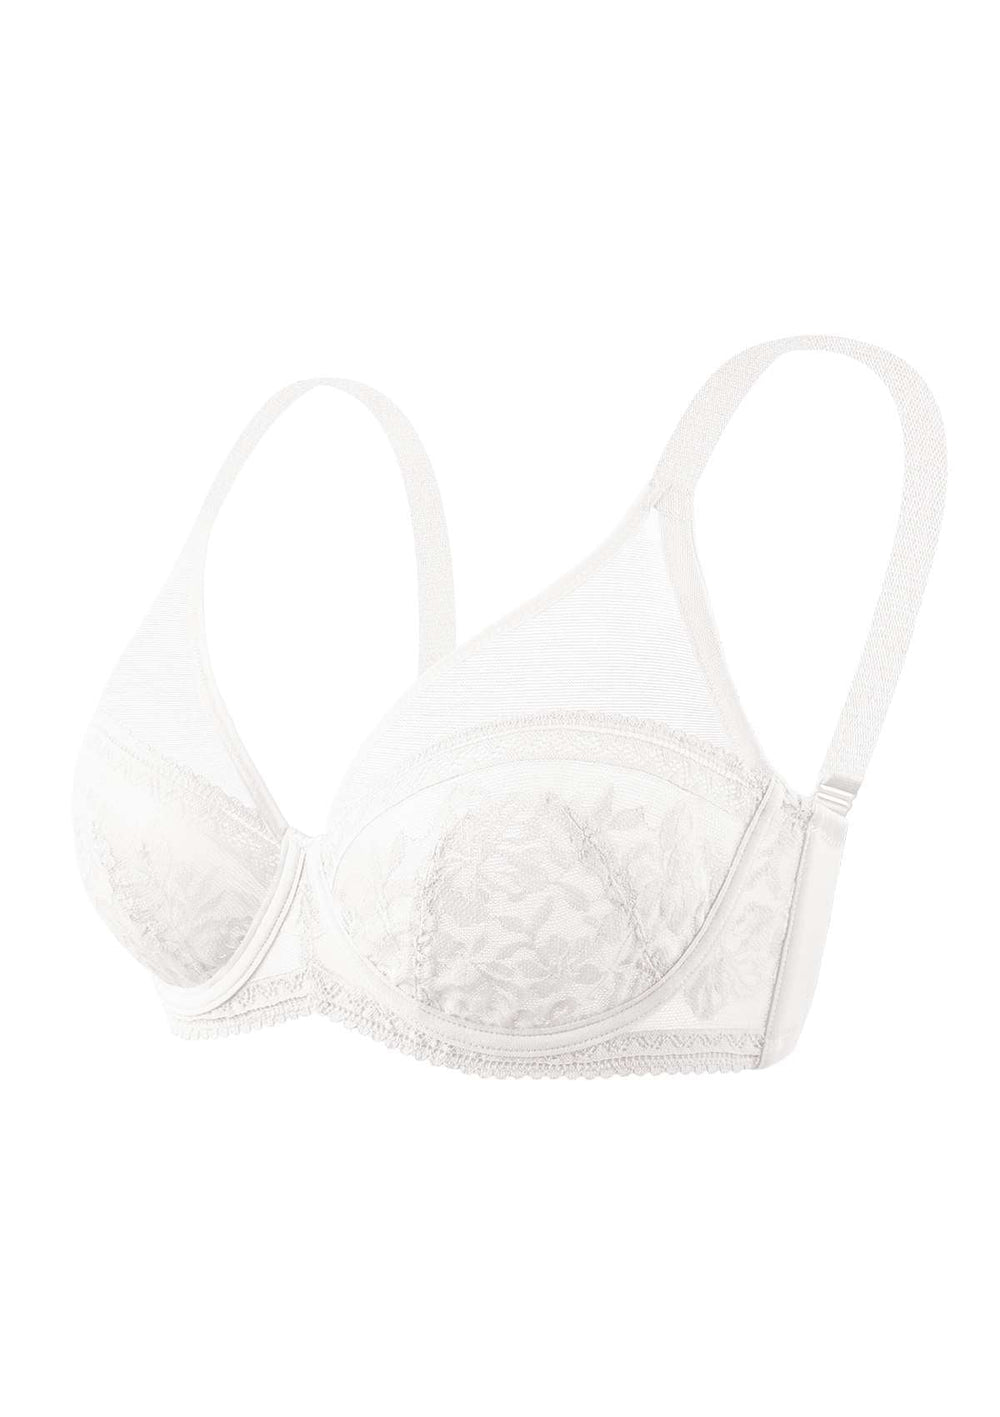 Quilted Perforated Lace Edged Cotton Bra Design - Daraghmeh